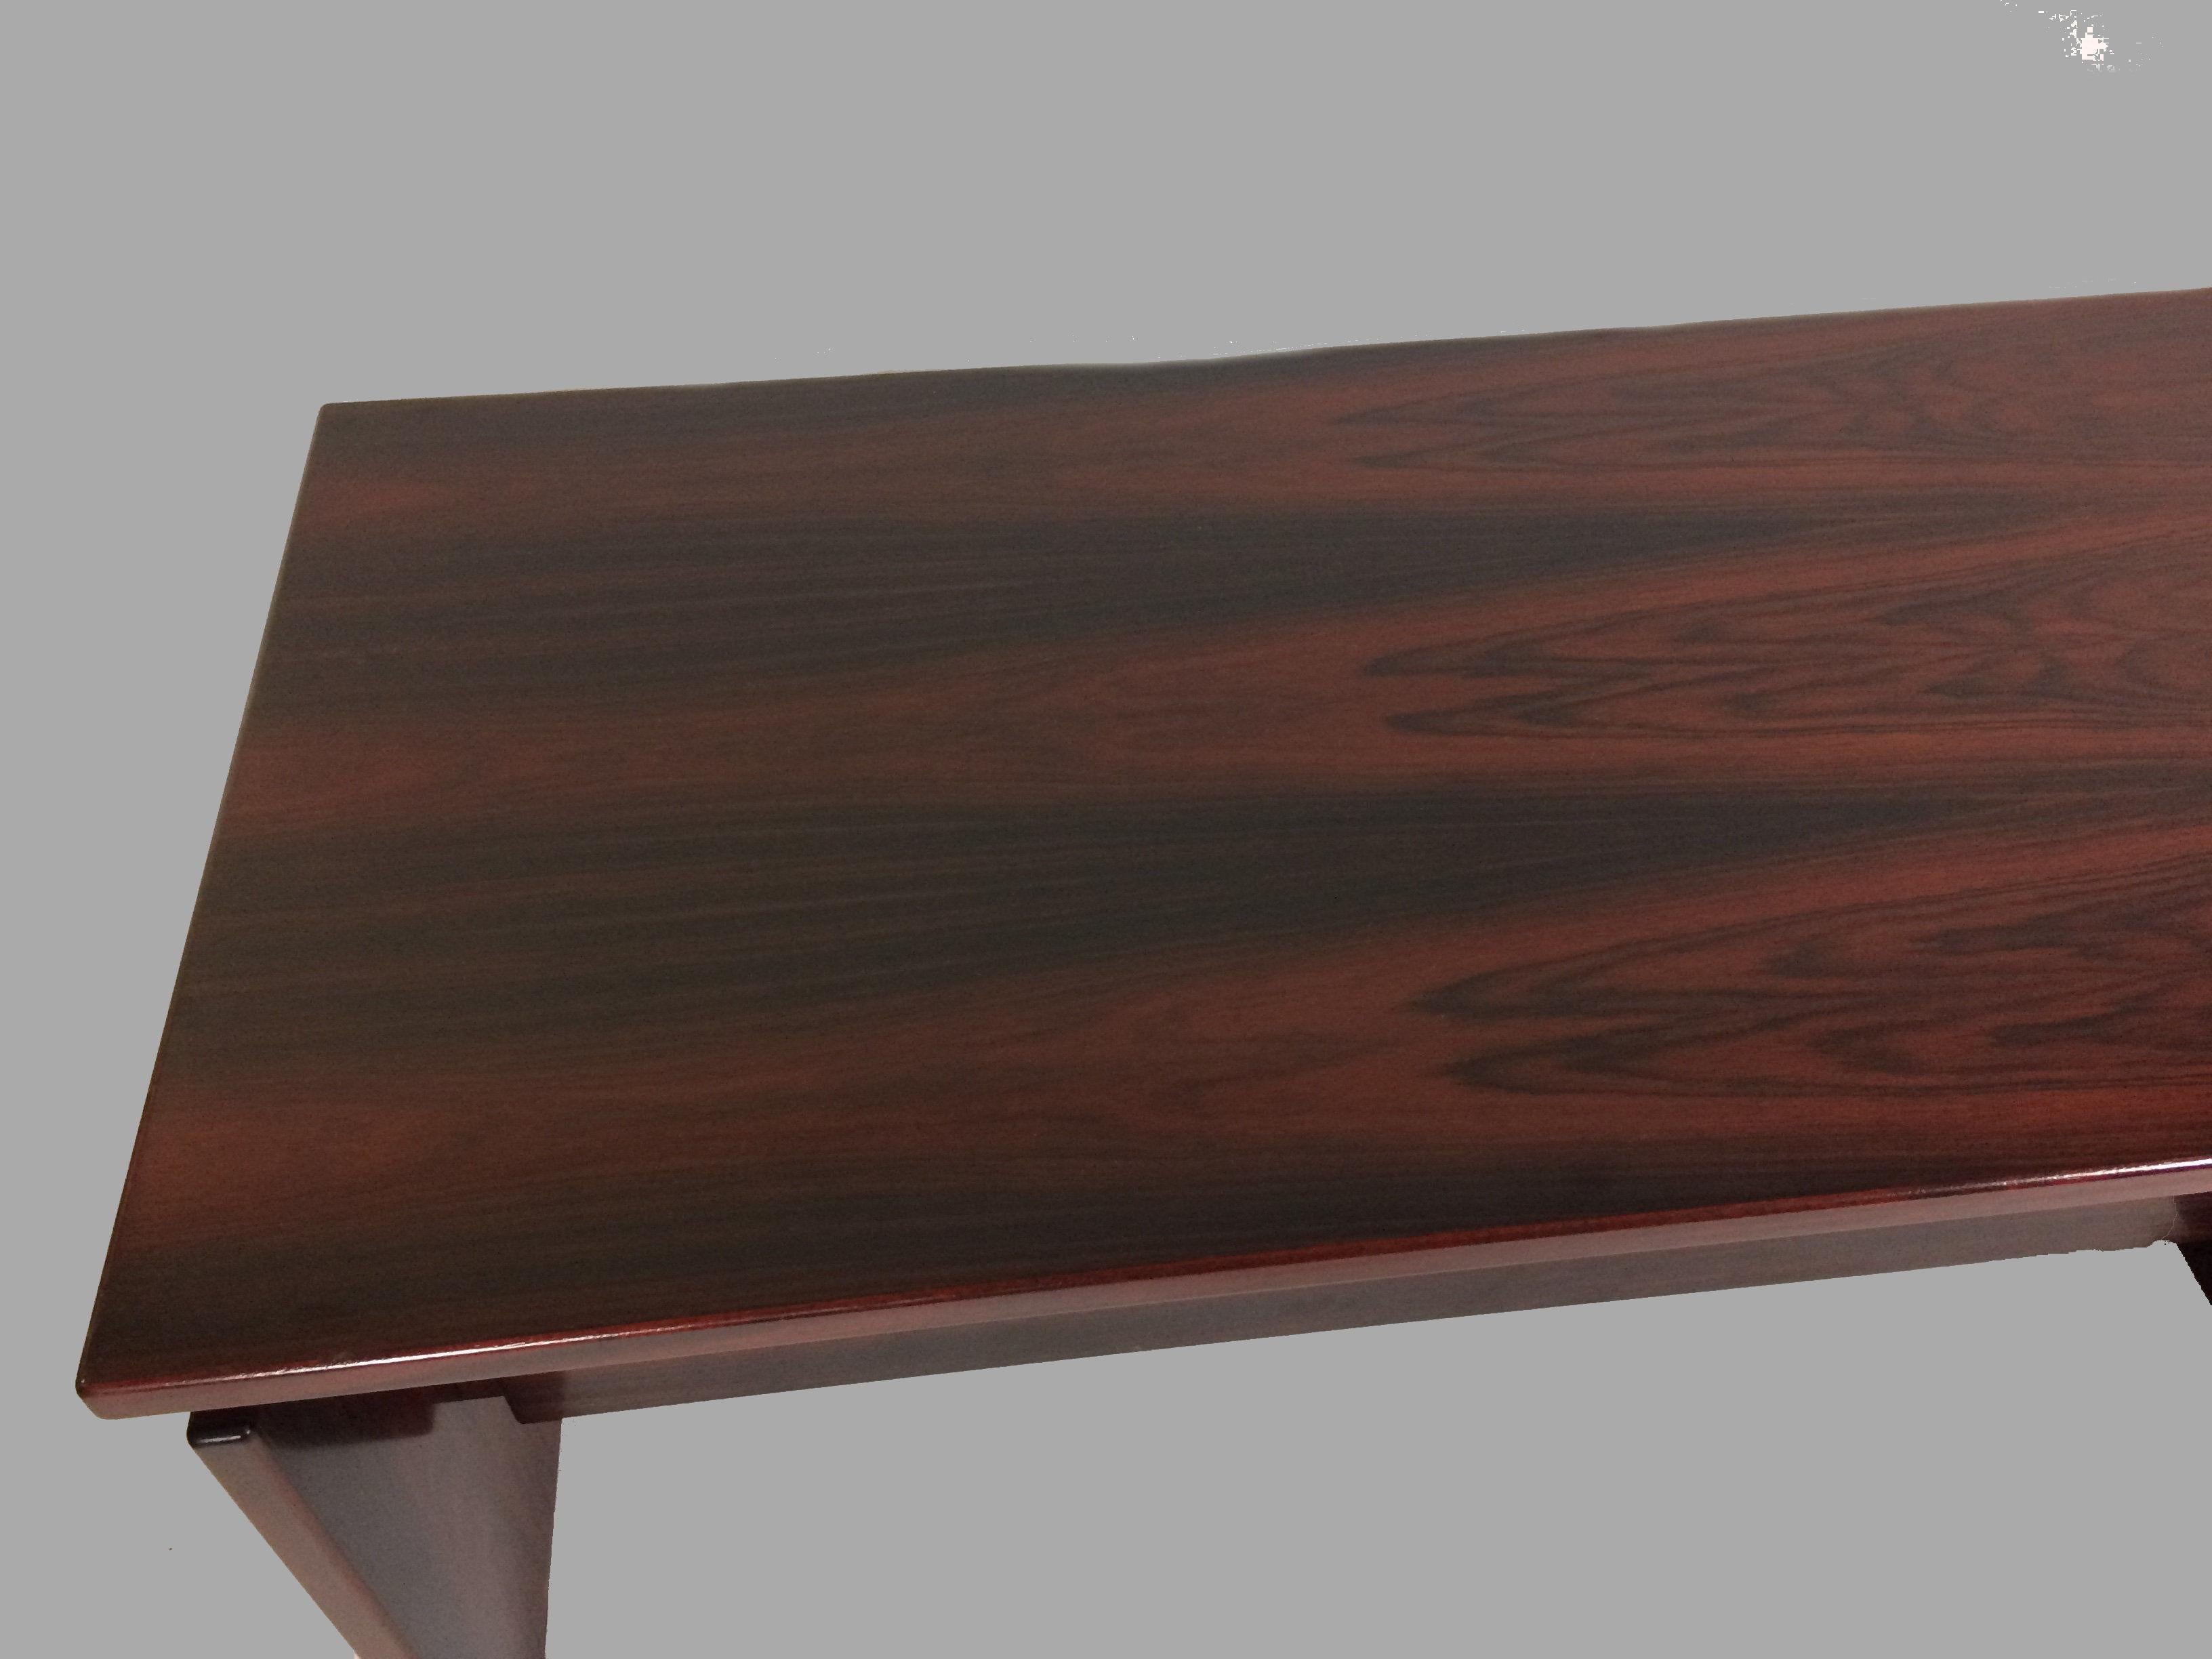 Danish 1990s Excecutive Desk in Rosewood by Bent Silberg for Bent Silberg Mobler